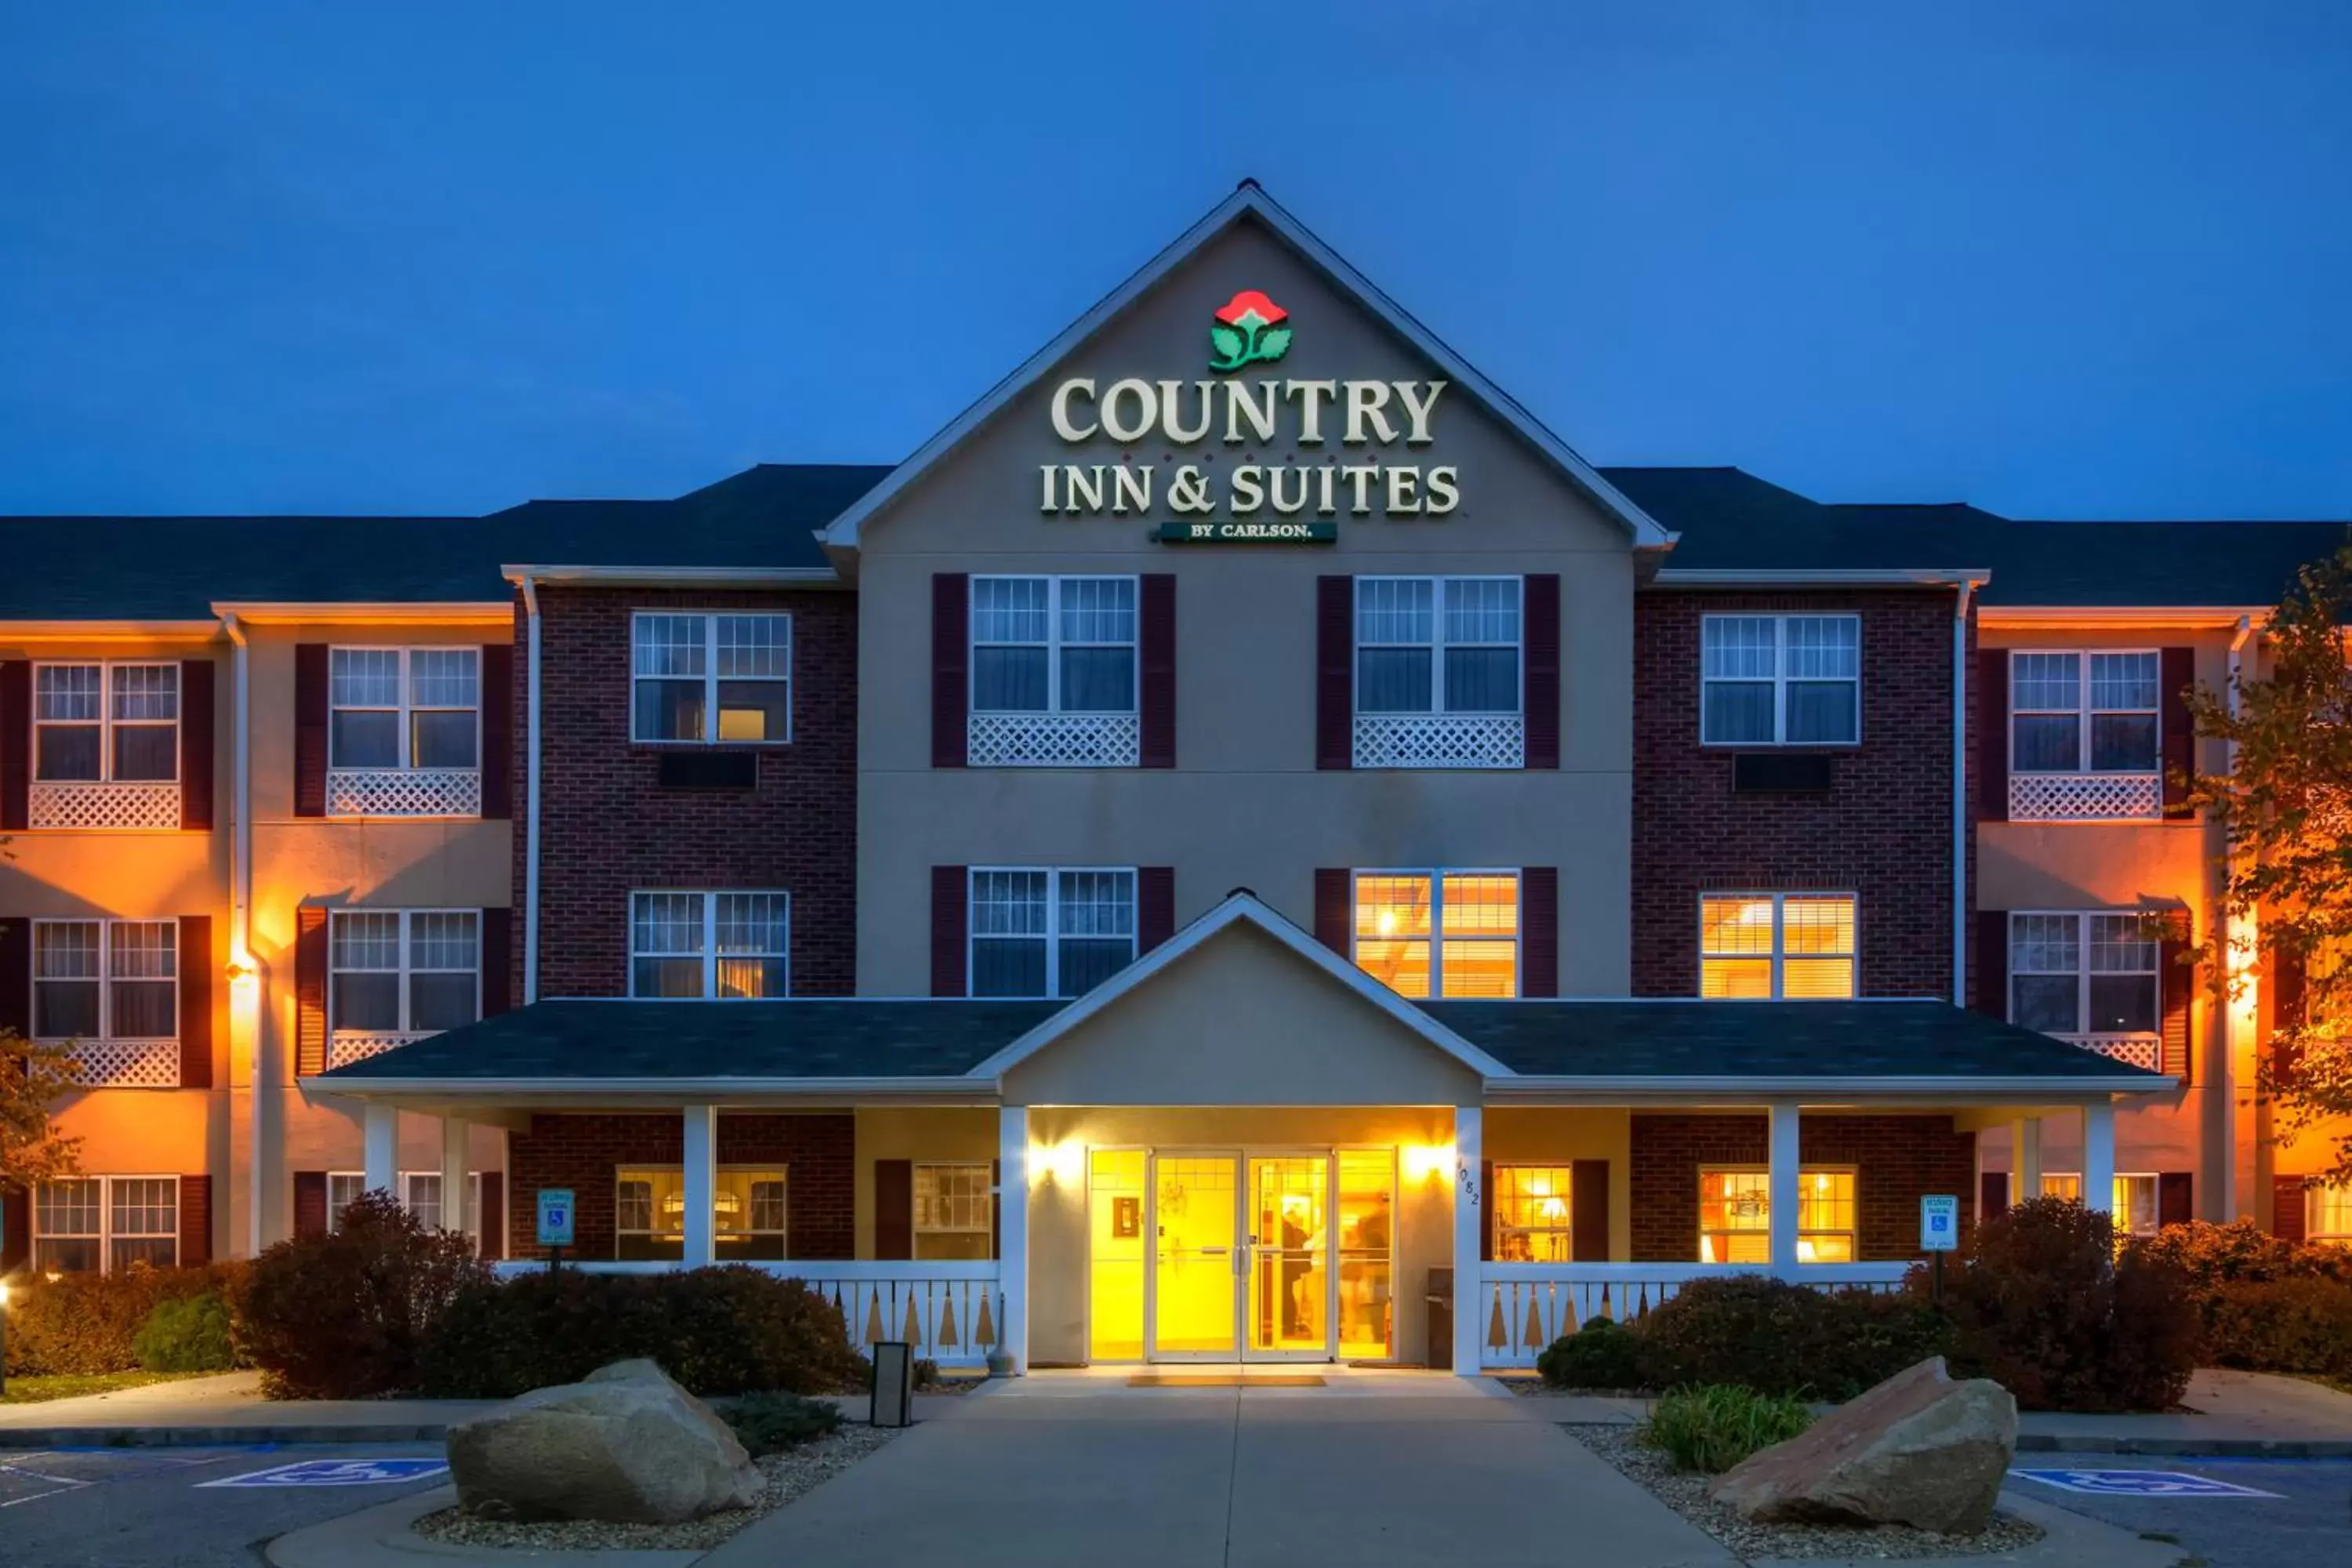 Facade/entrance, Property Building in Country Inn & Suites by Radisson, Mason City, IA